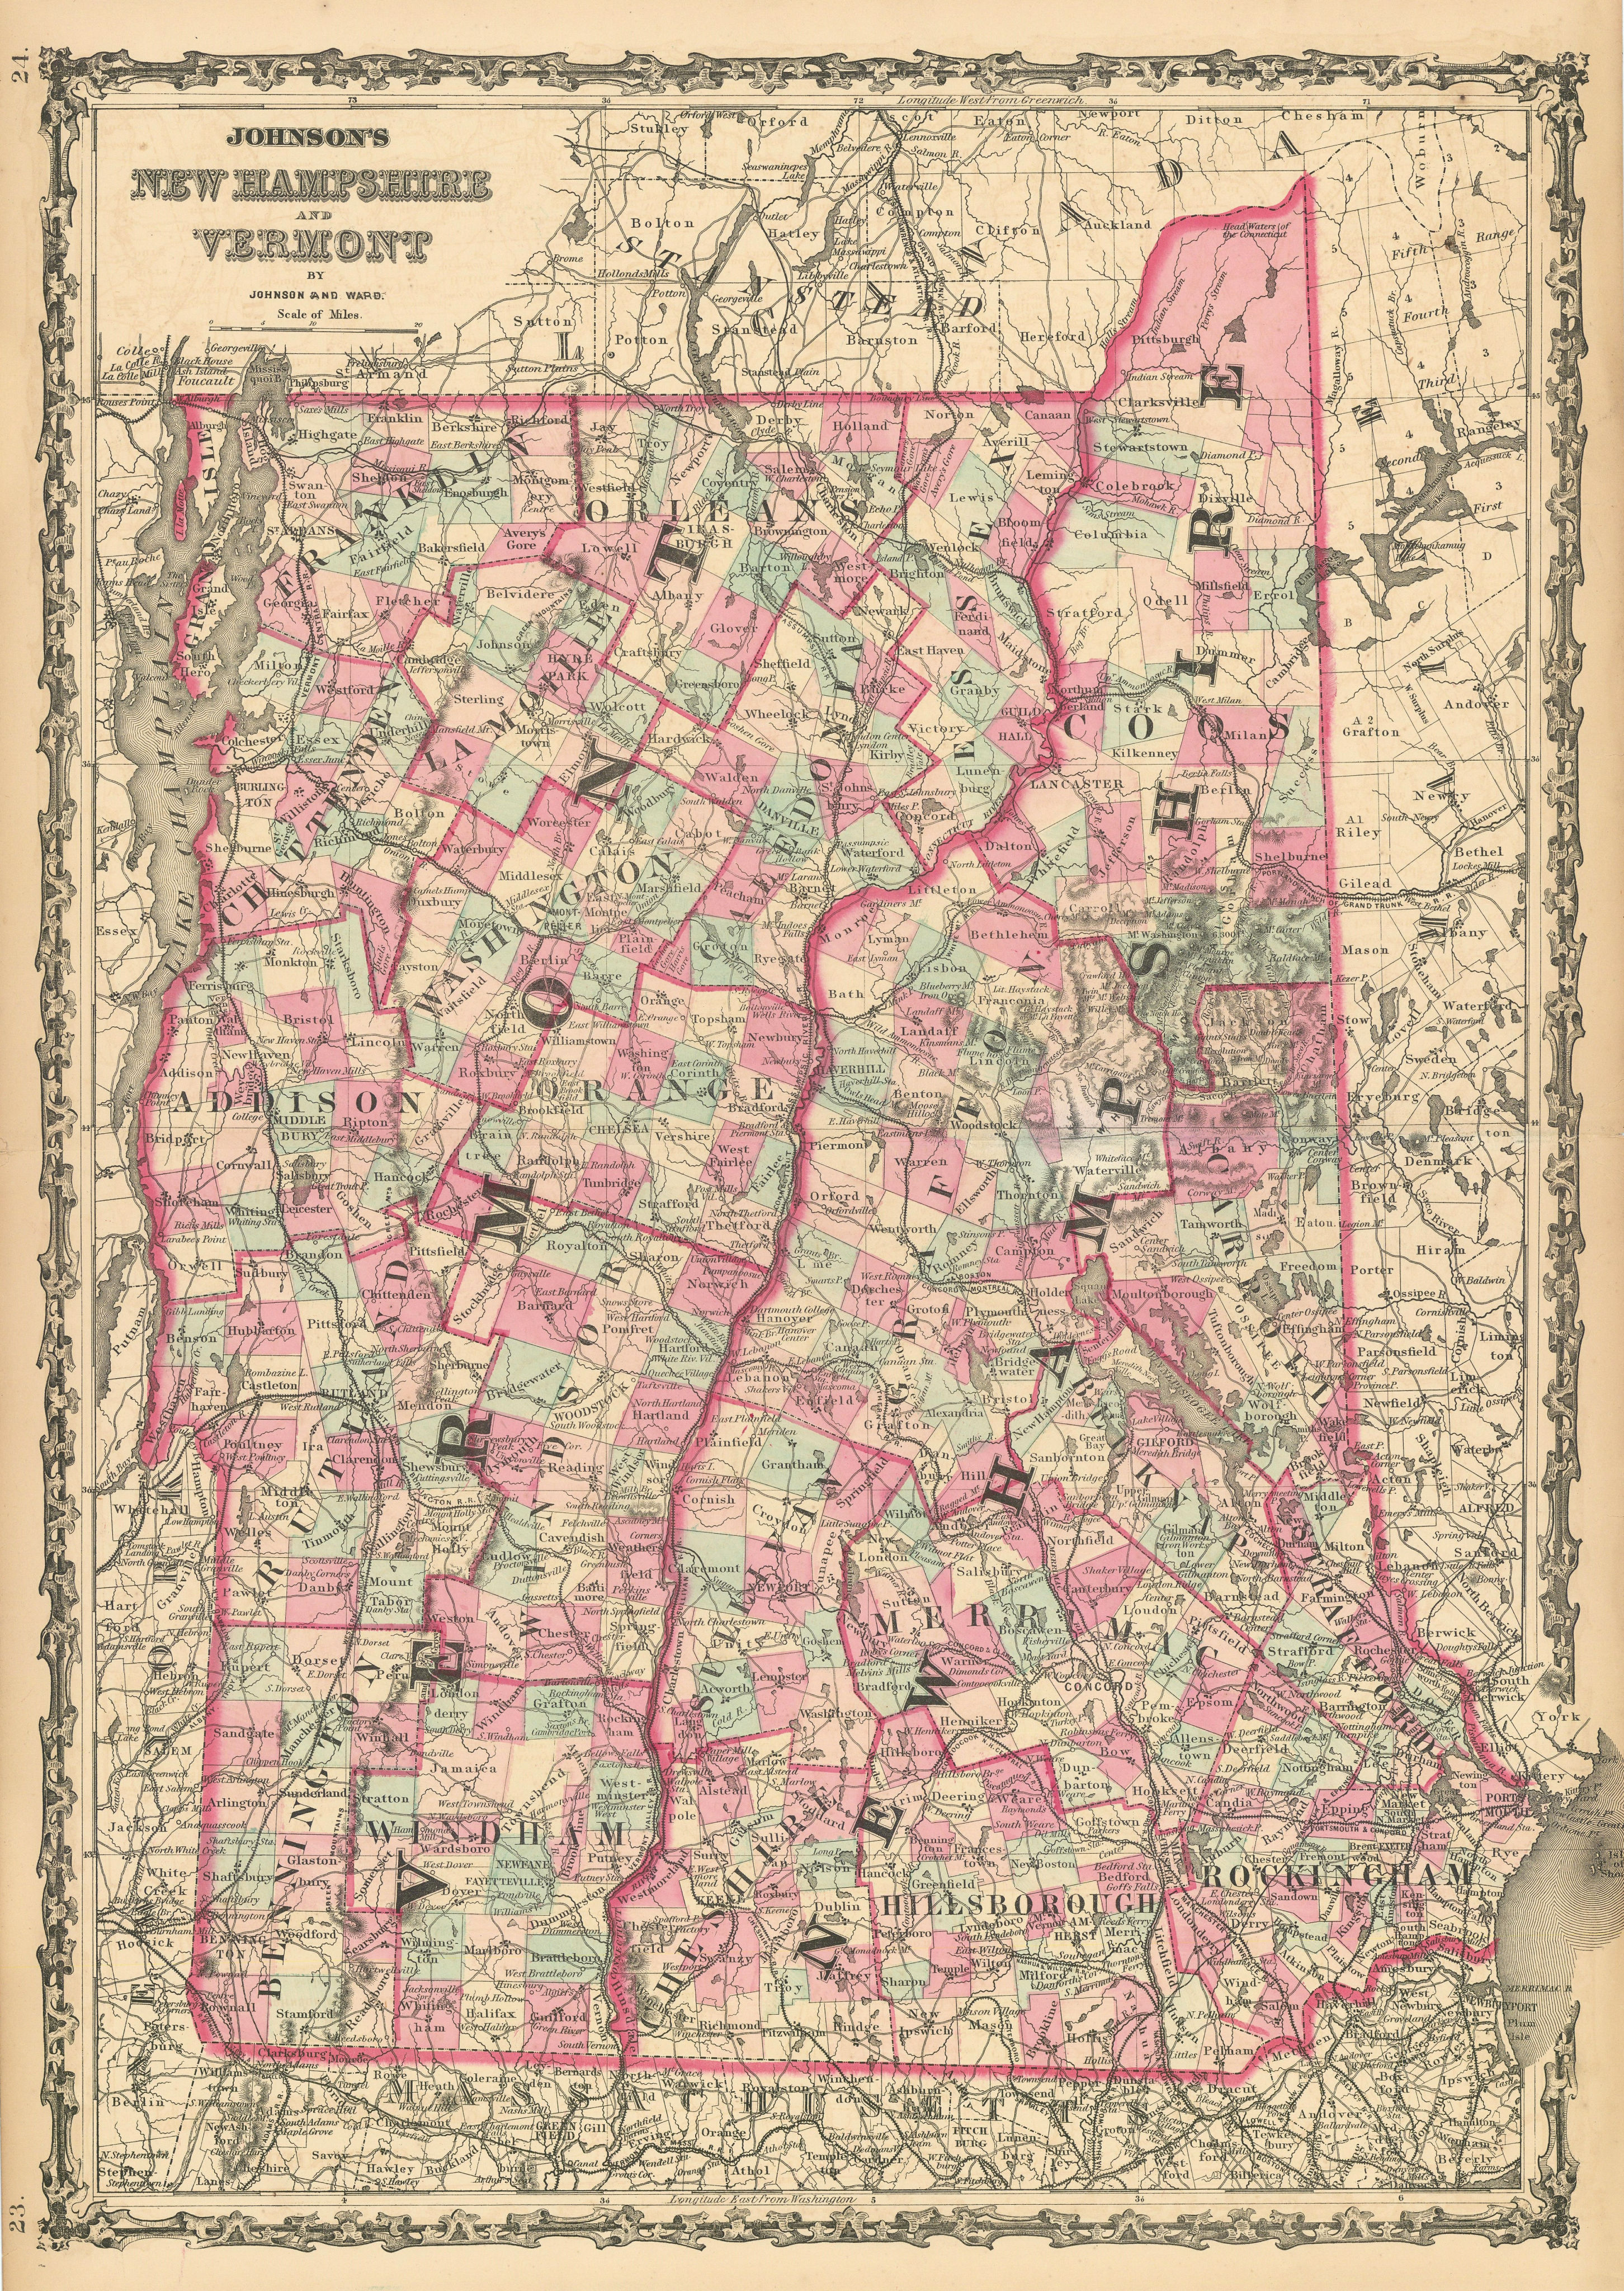 Johnson's New Hampshire & Vermont. US State map showing counties 1862 old